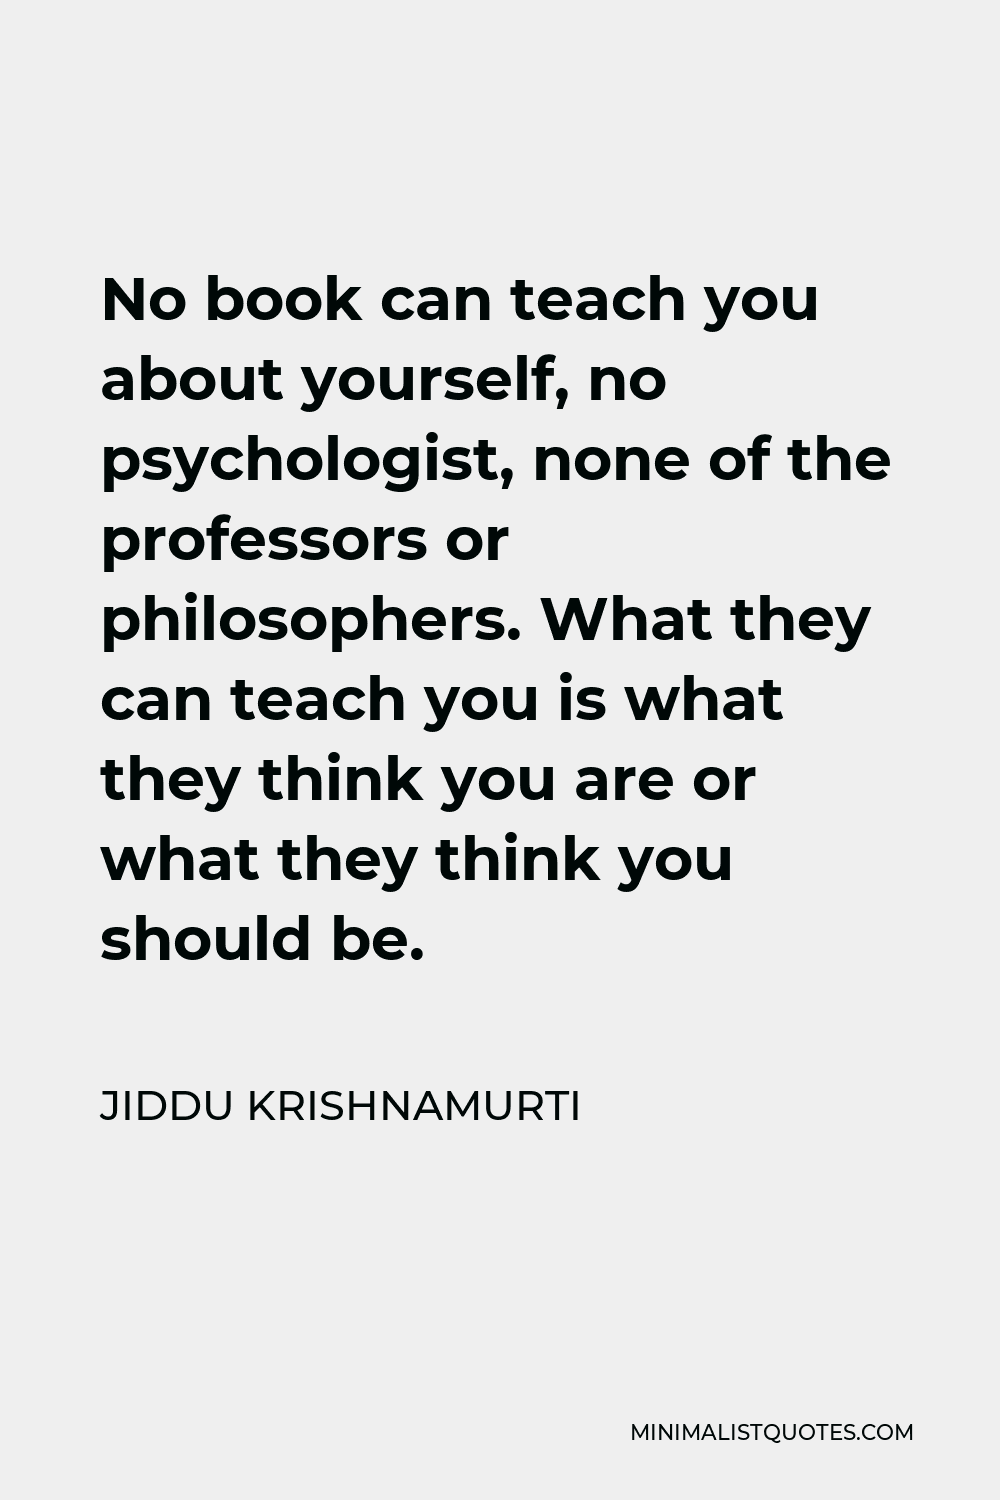 Jiddu Krishnamurti Quote - No book can teach you about yourself, no psychologist, none of the professors or philosophers. What they can teach you is what they think you are or what they think you should be.